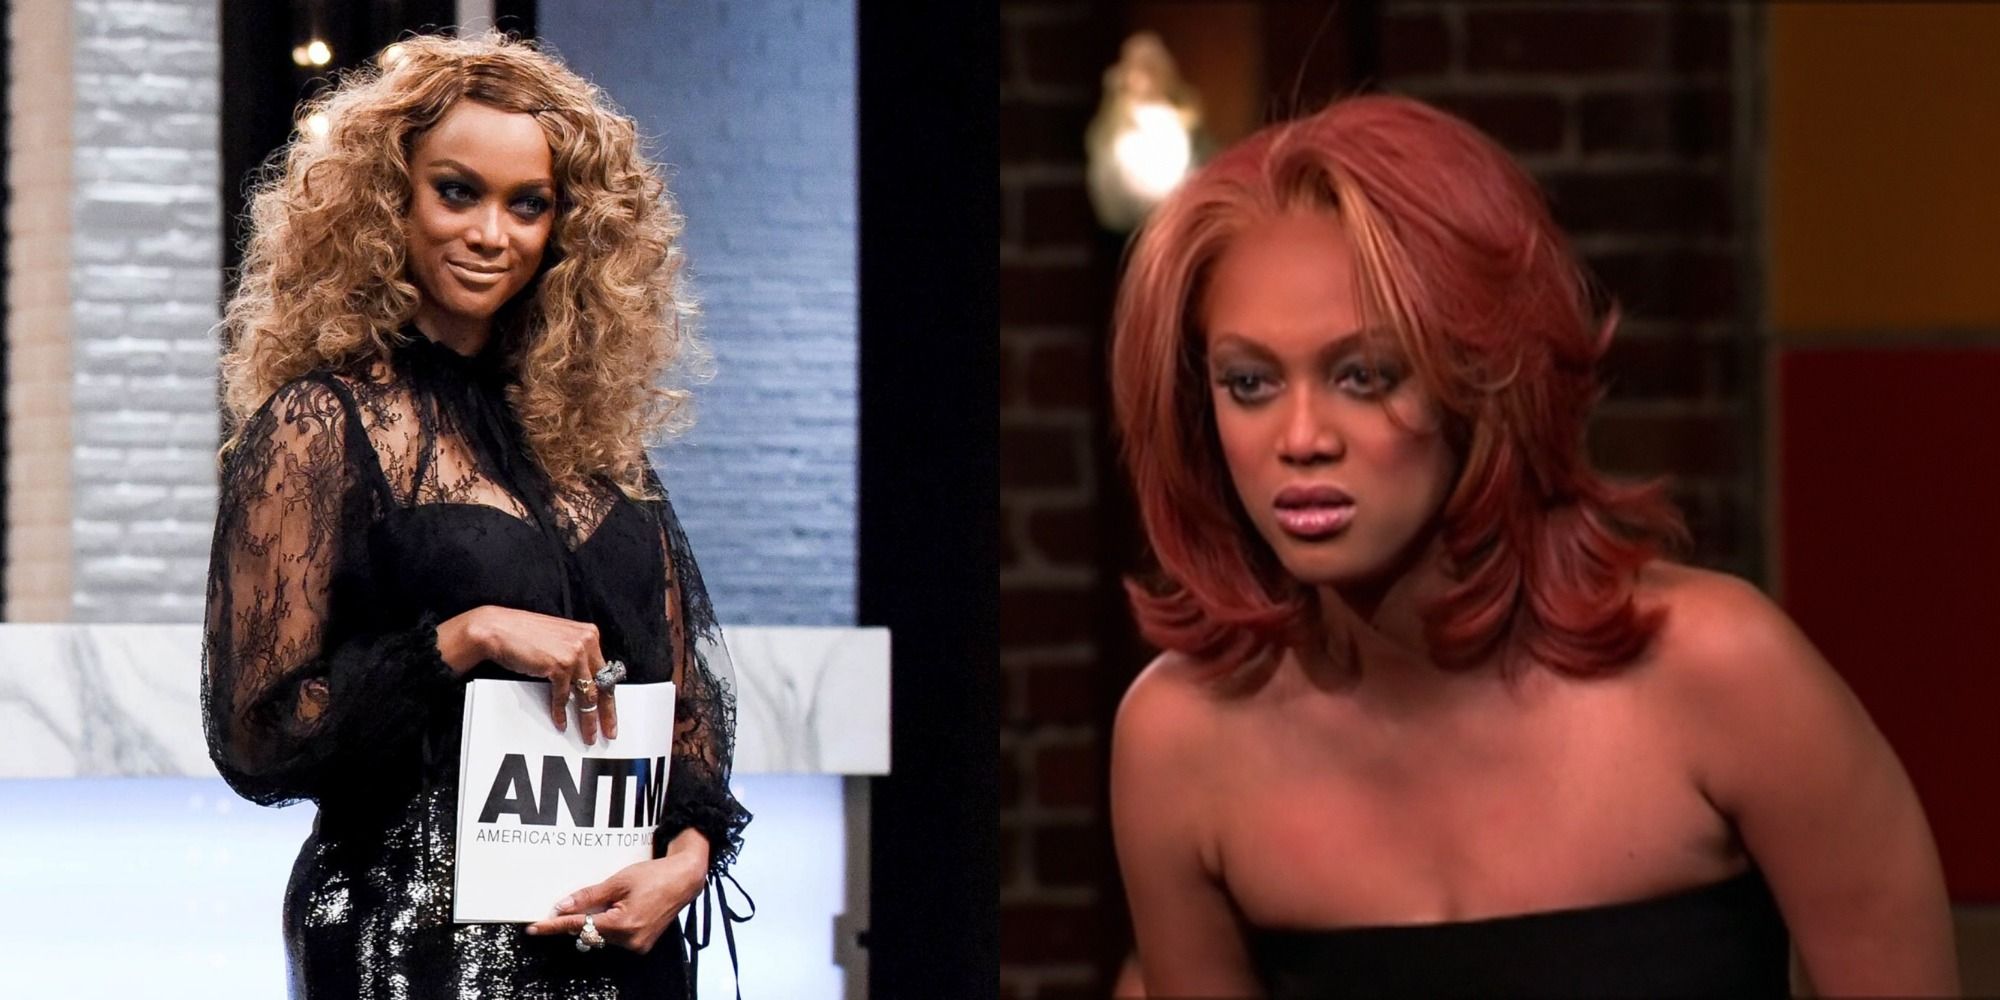 Split image showing Tyra Banks smiling and angry in ANTM